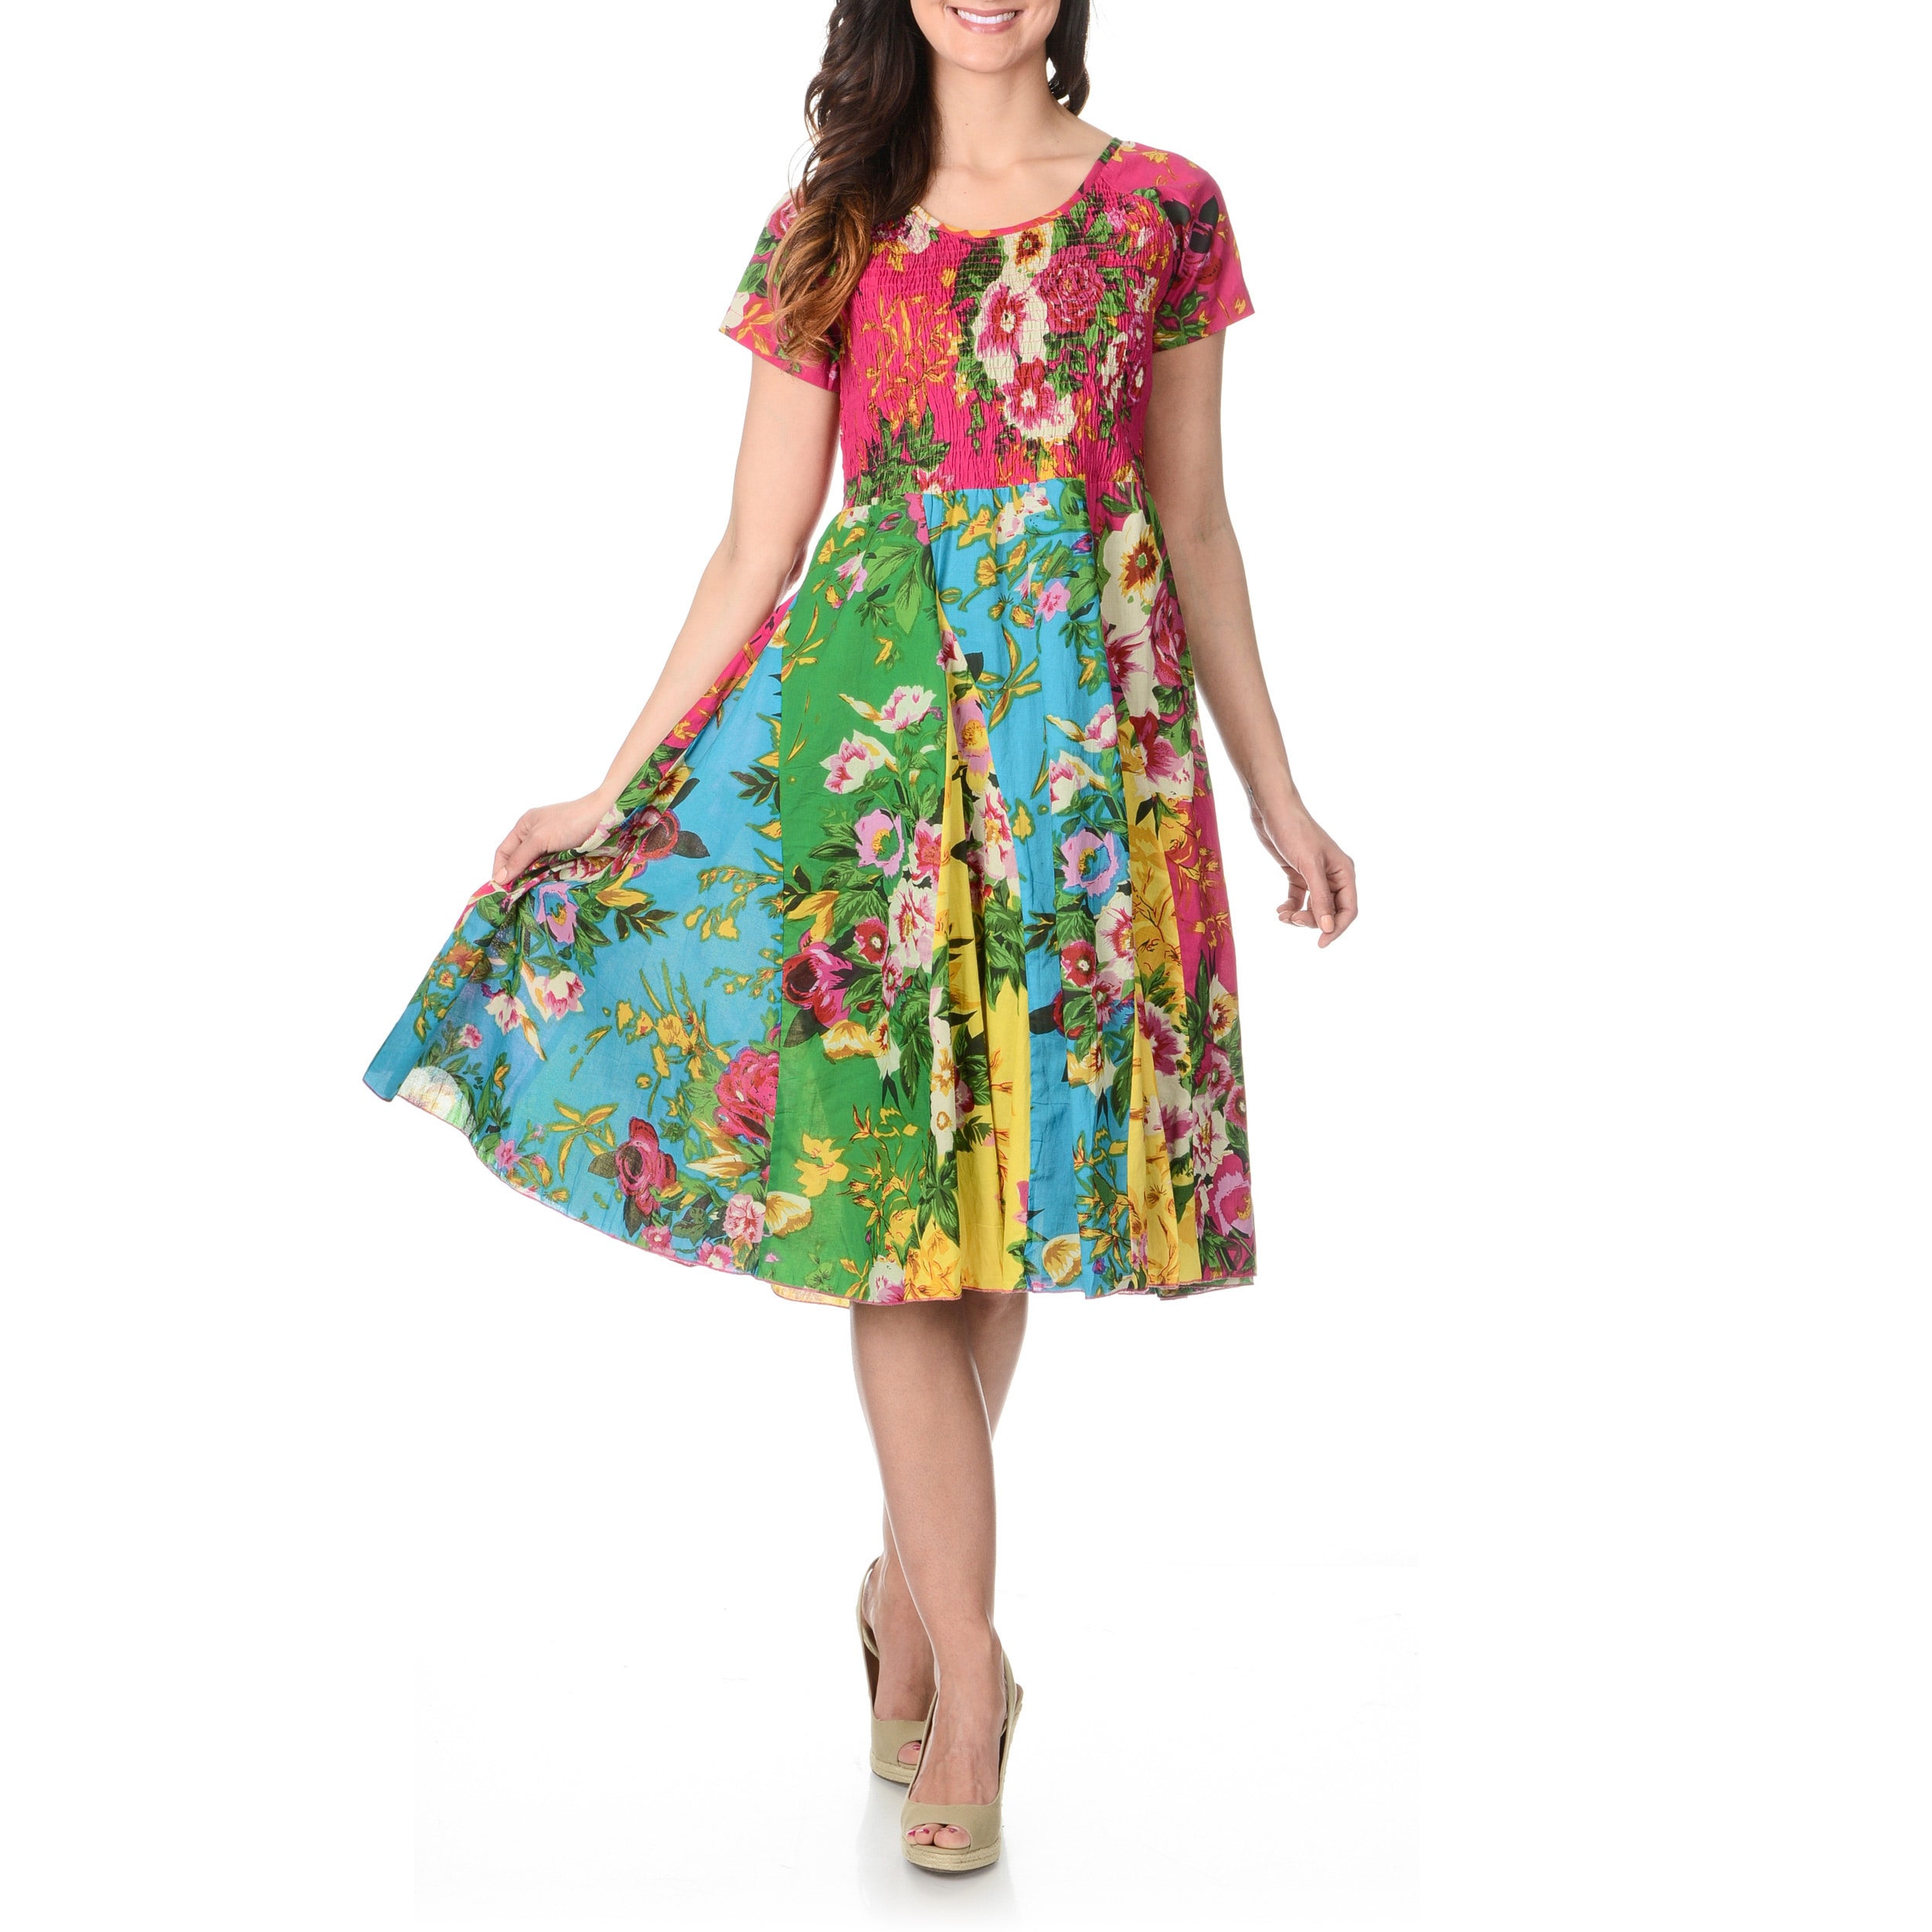 Shop La Cera Women's Multi Floral Puckered Dress - Free Shipping Today ...